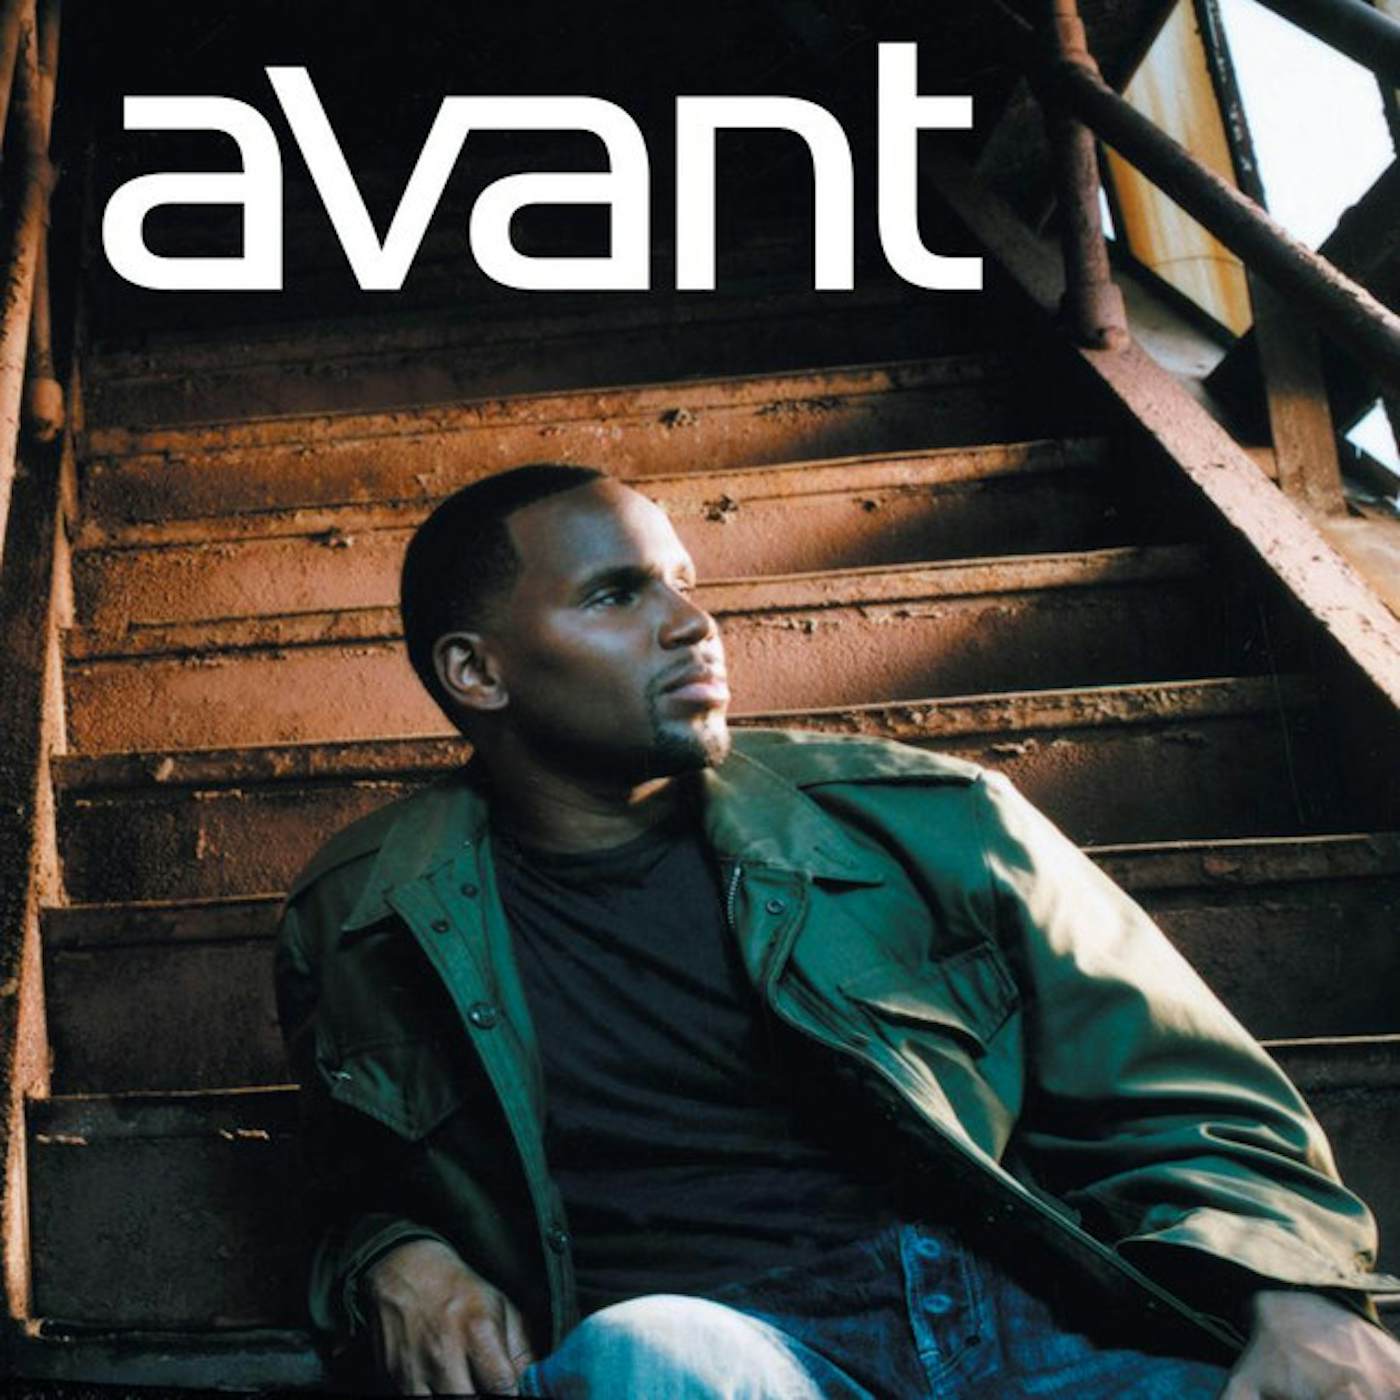 Avant YOU KNOW WHAT (X2) Vinyl Record